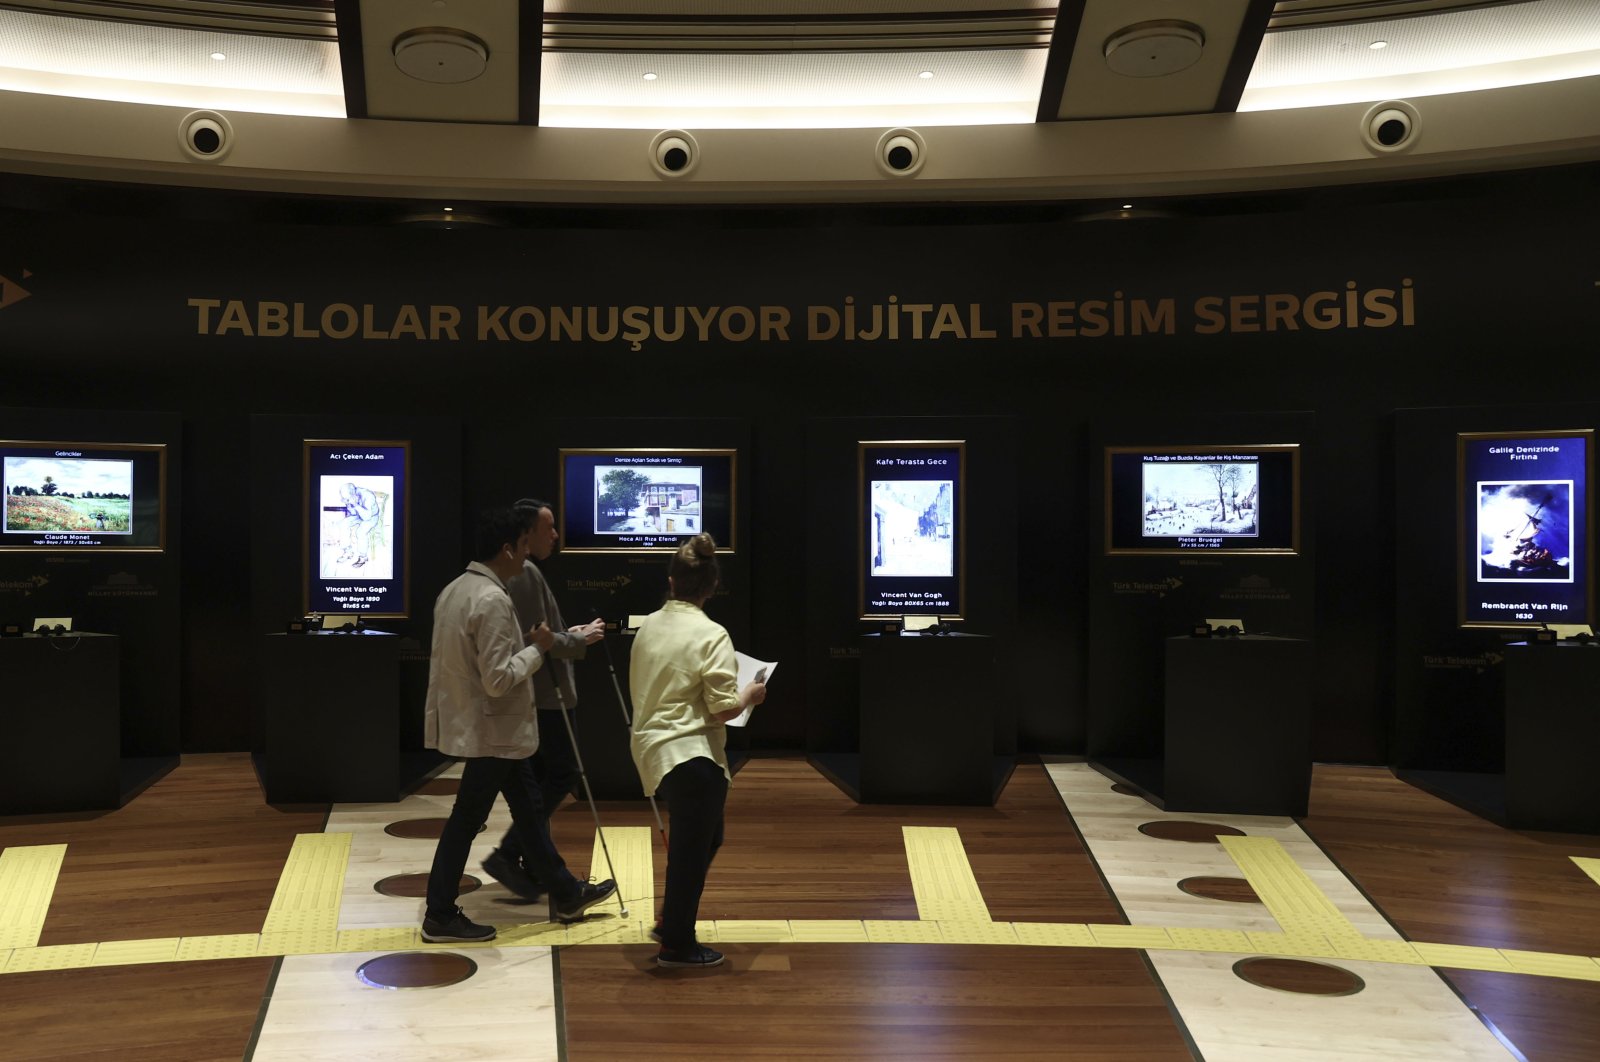 People visit the “Paintings Talk Digital Art Exhibition” at the Presidential Library within the scope of the 10th anniversary of Türk Telekom’s “Telephone Library” project that allows visually impaired people to access information and meet with art, Ankara, Turkey, July 30, 2021. (AA Photo)